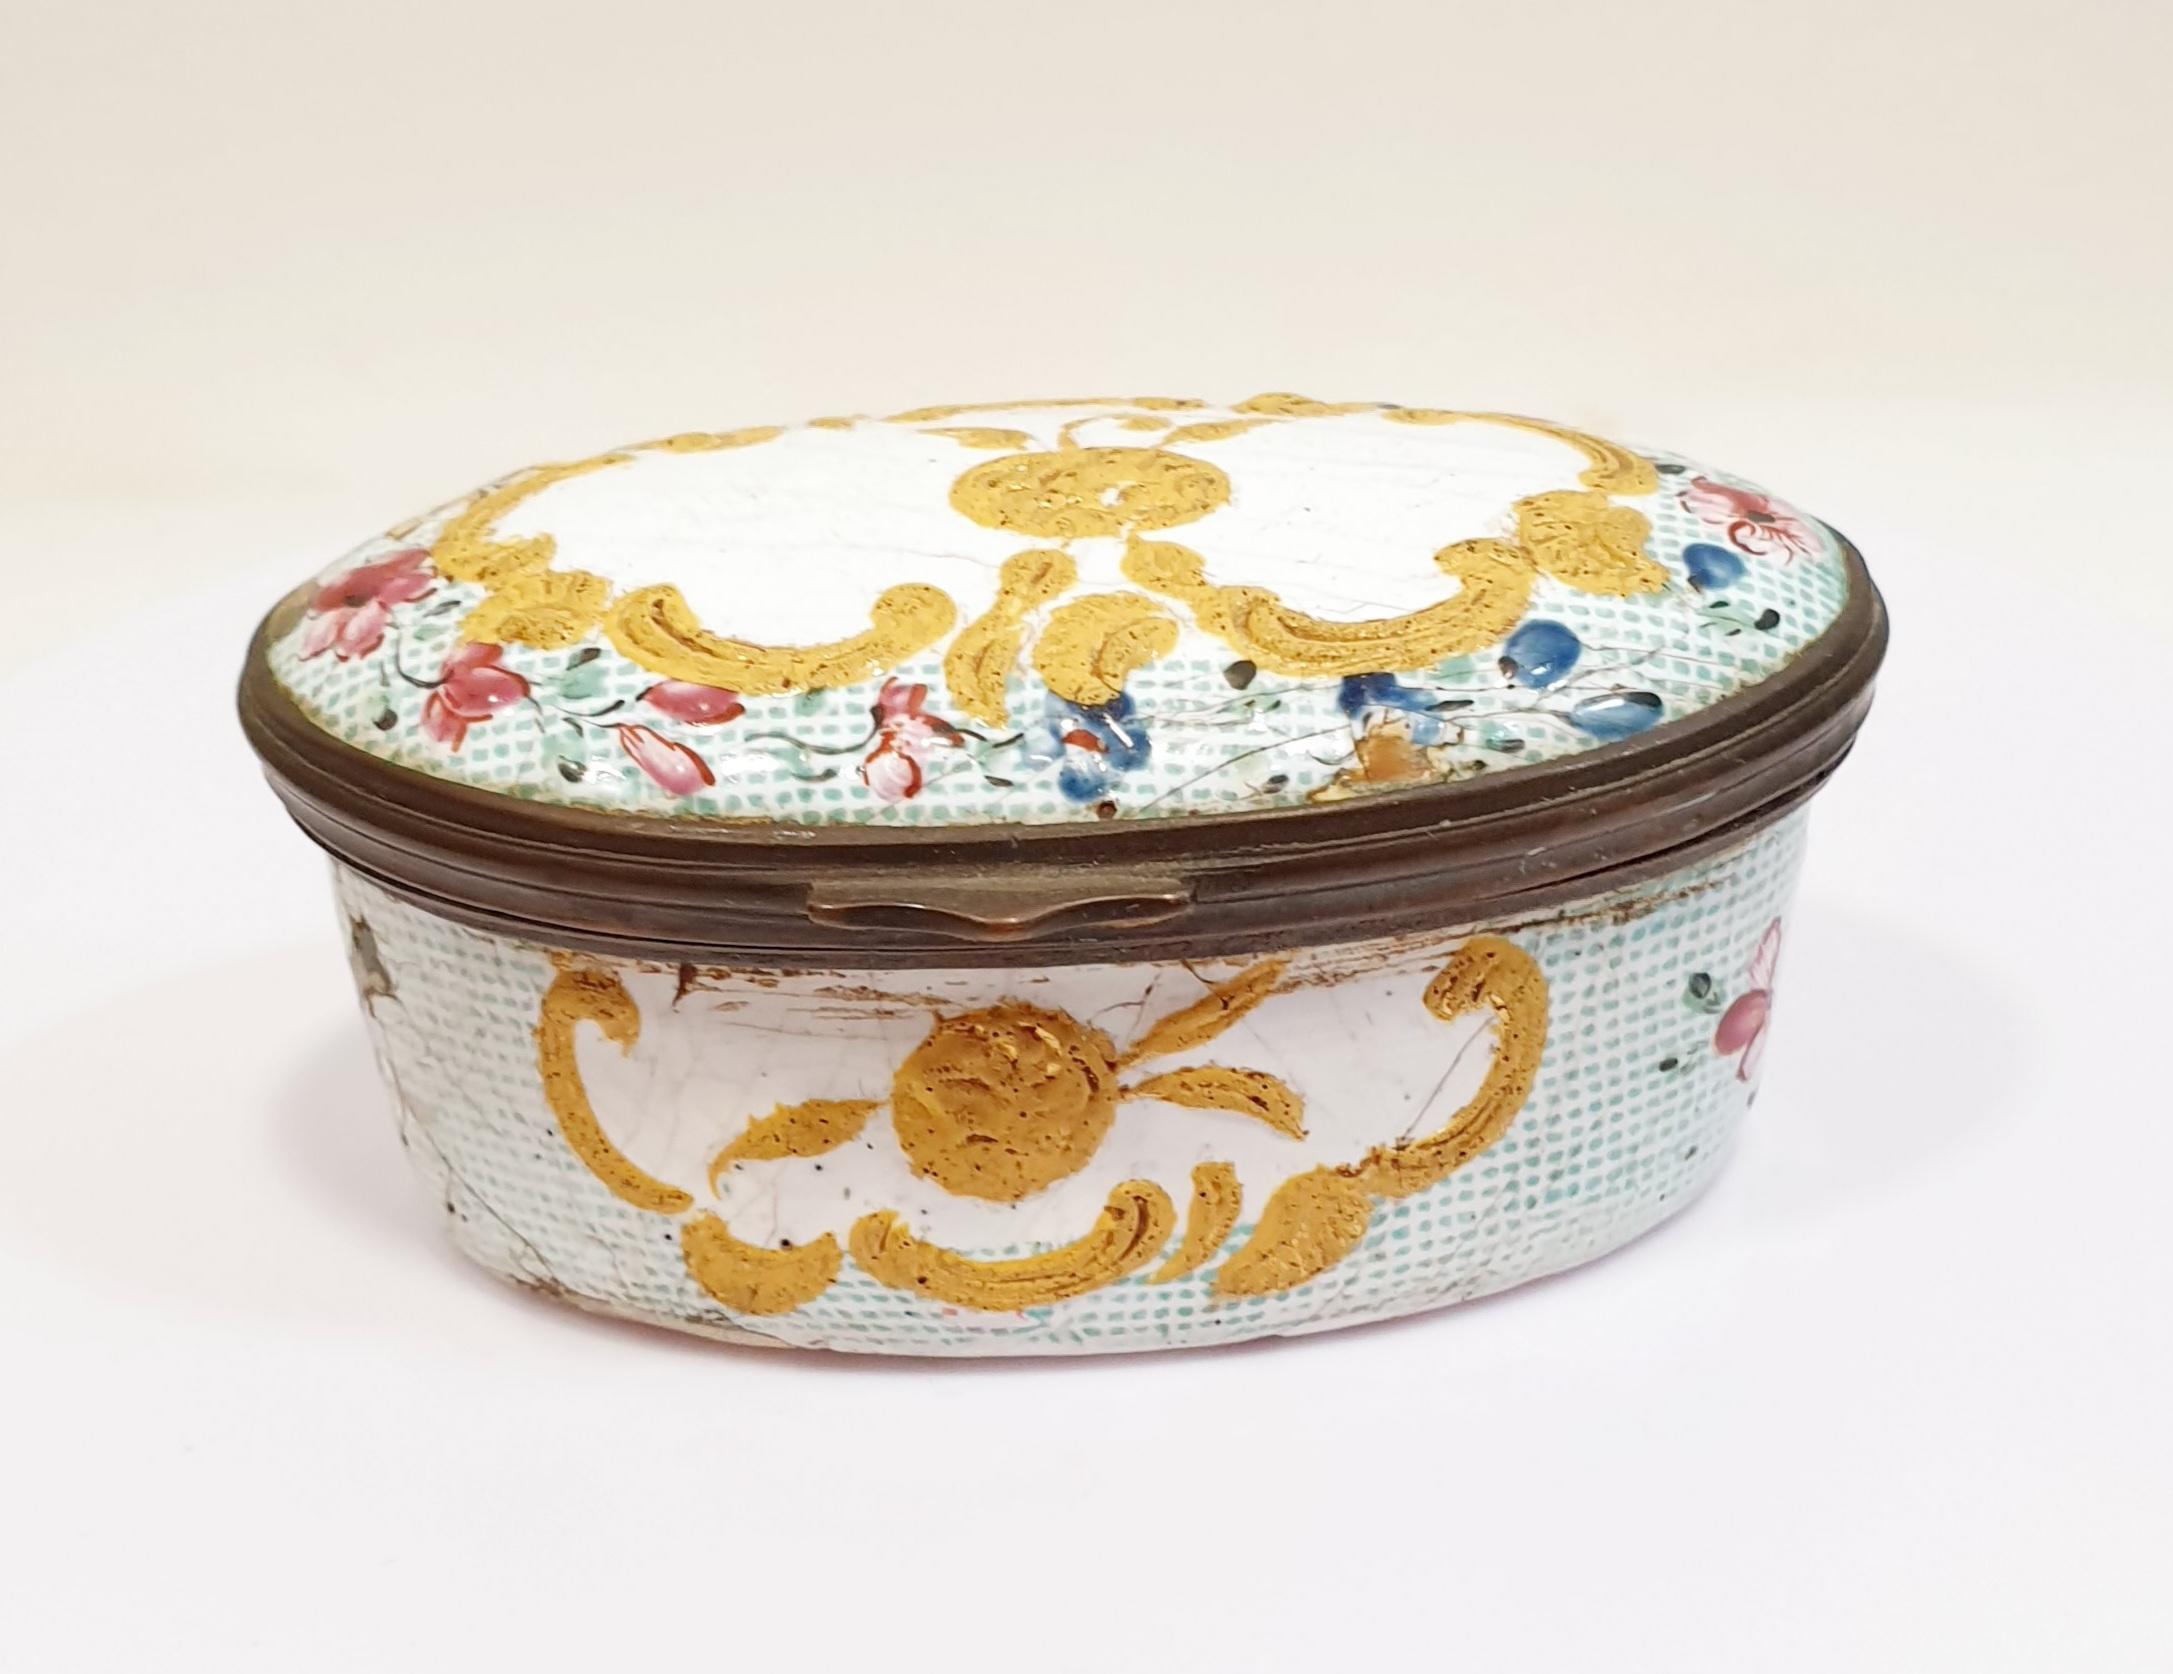 Antique 19th jewellery hand painted porcelain box with flowers
aprox 1880 hand painted in yellow porcelaine
Perfect gift for decoration or keeping personal and valuable items
Part of a personal collection of 6 

PRADERA is a second generation